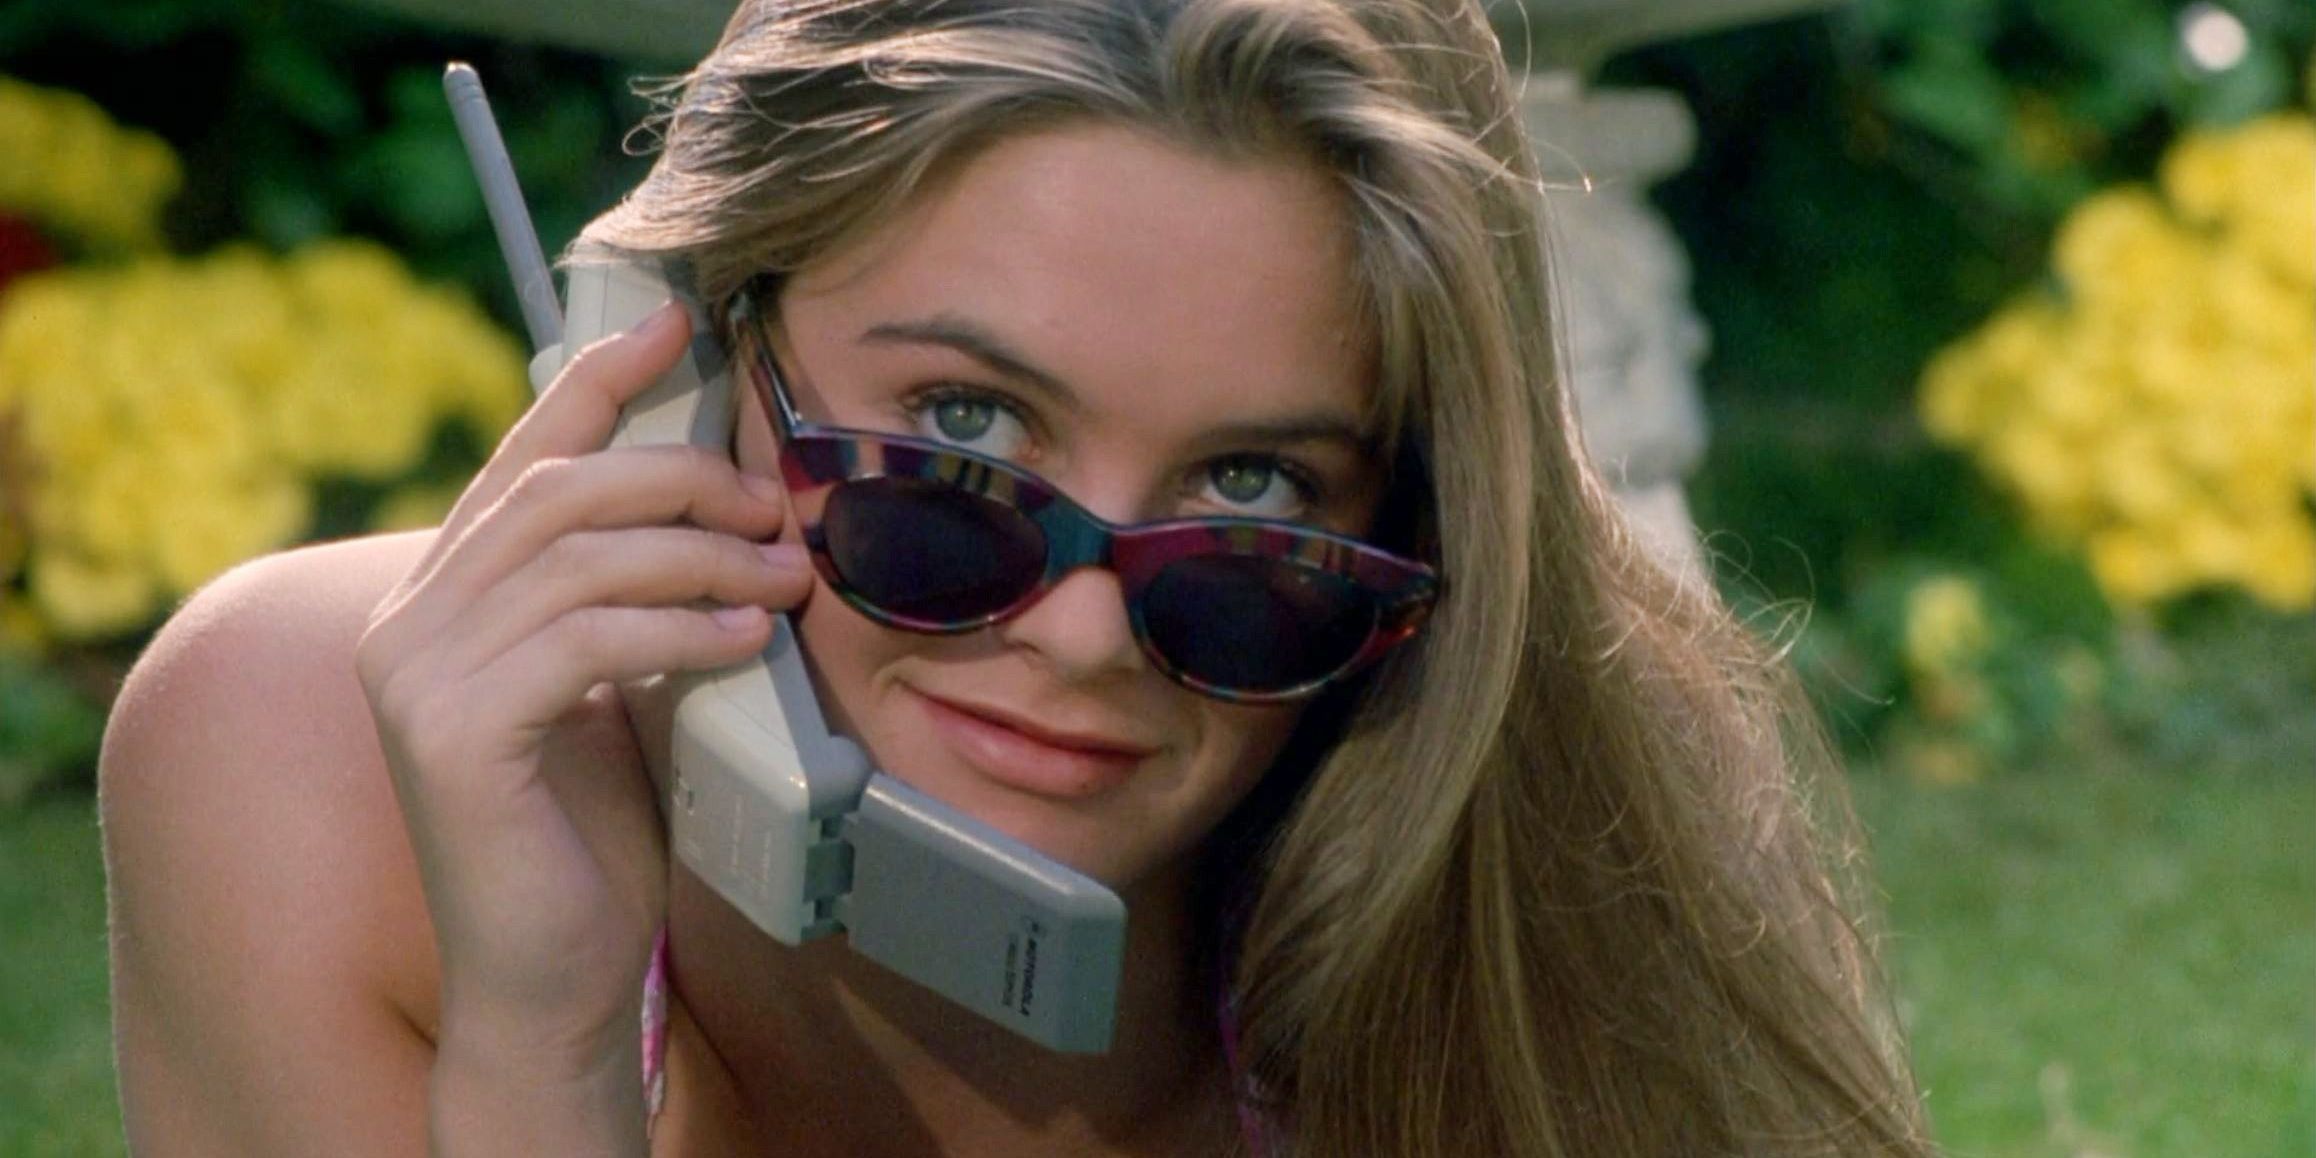 Alicia Silverstone on the phone in the garden and looking up from her sunglasses in The Crush